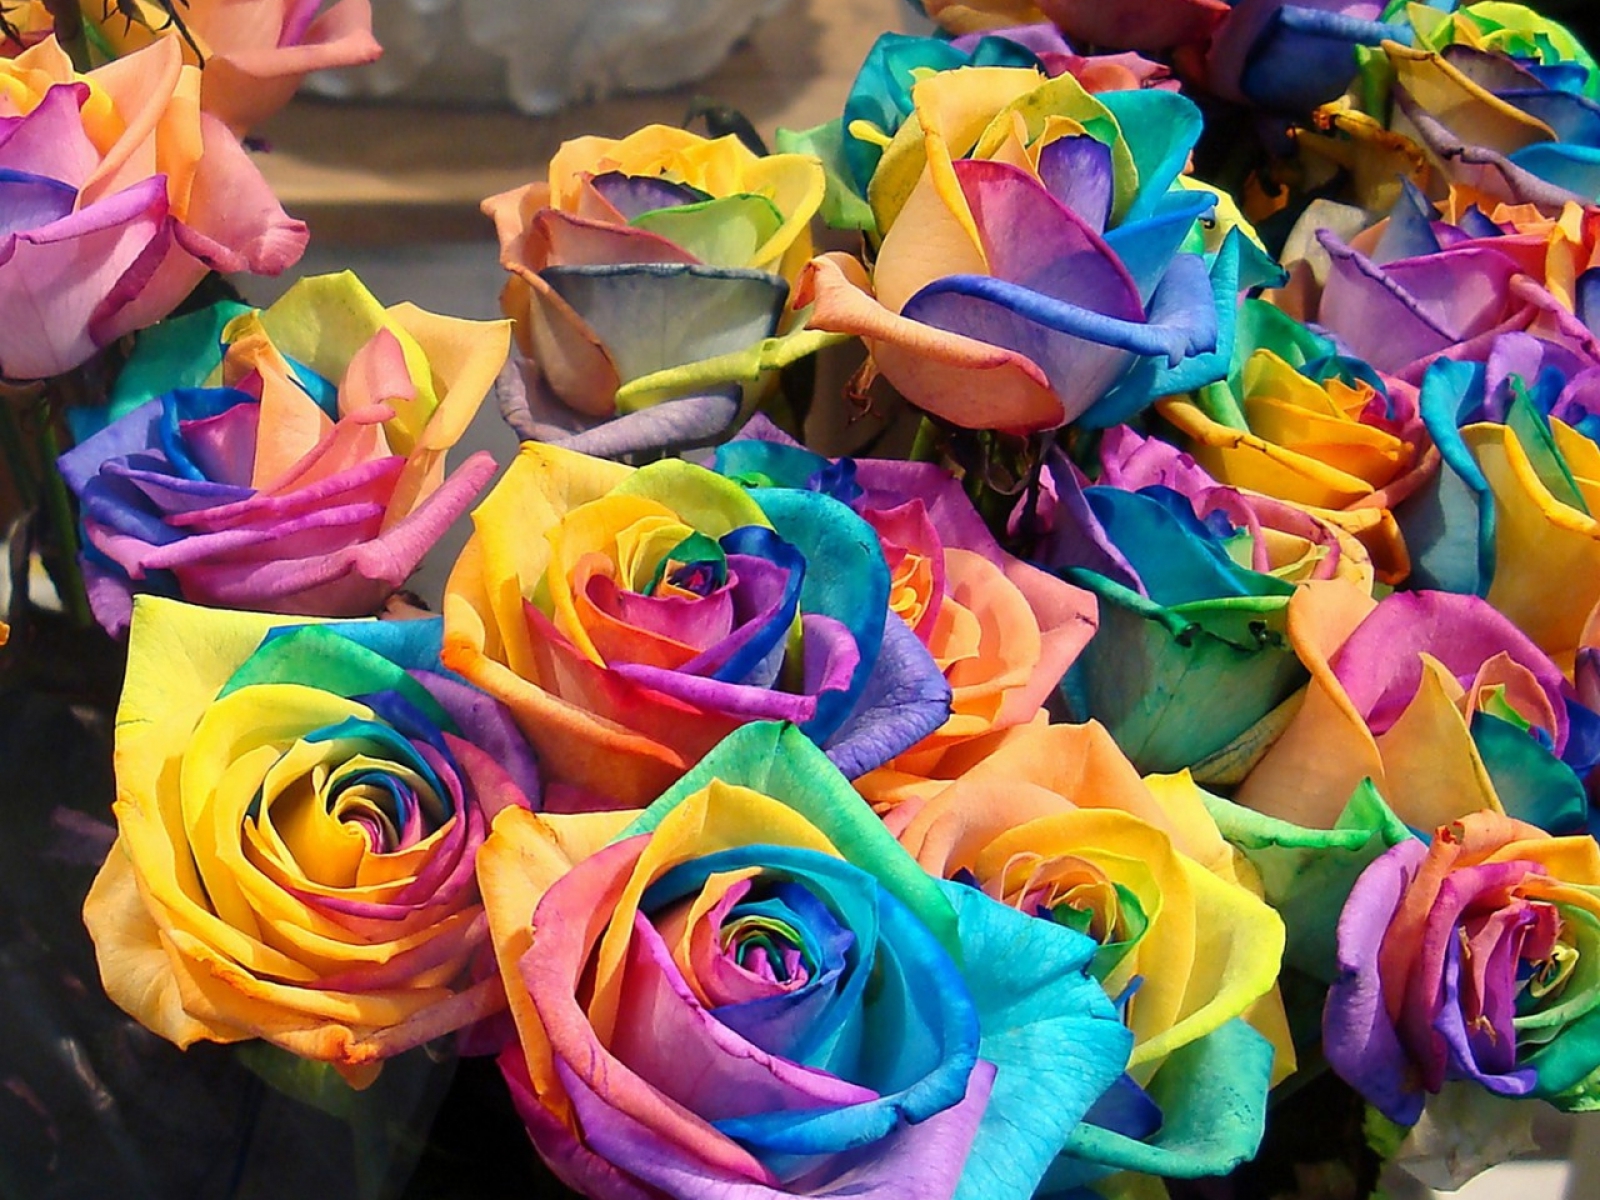 JUST HD WALLPAPERS: Colourful Rose Flower Wallpaper